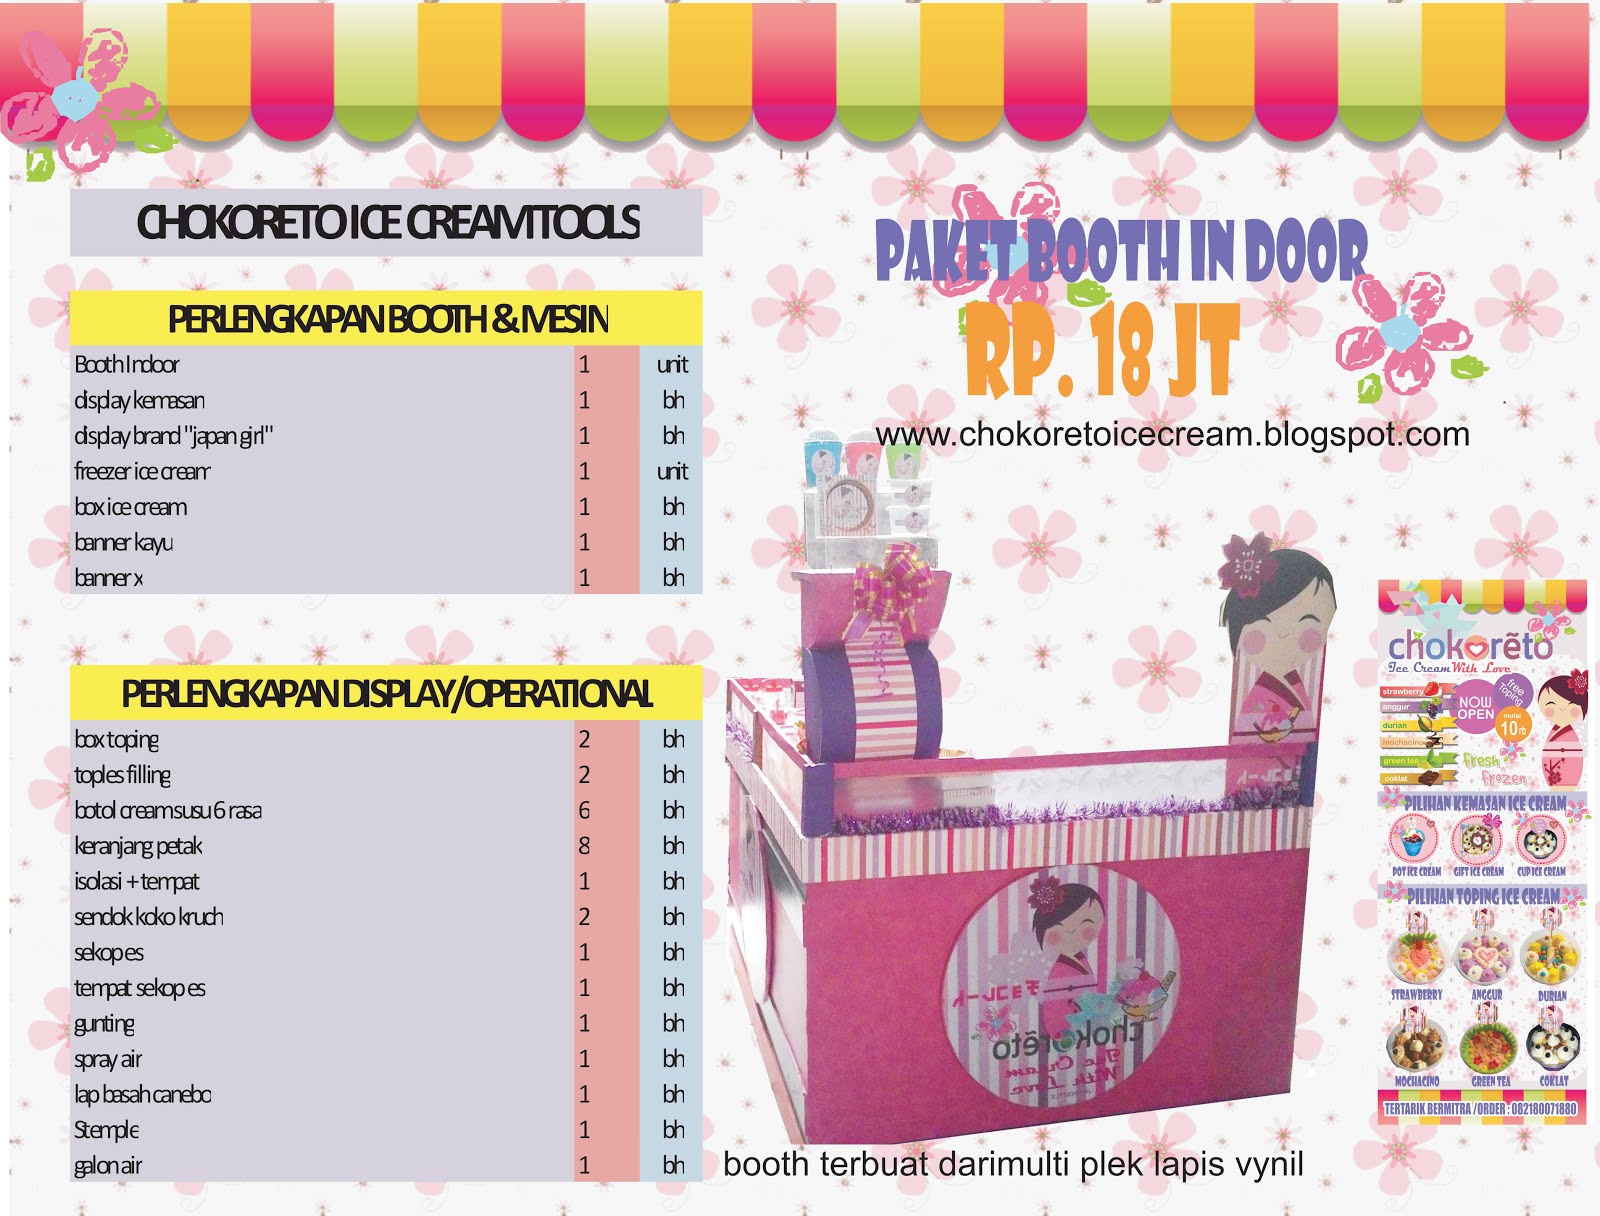 PAKET BOOTH IN DOOR 18 JT ( DI MALL dll)